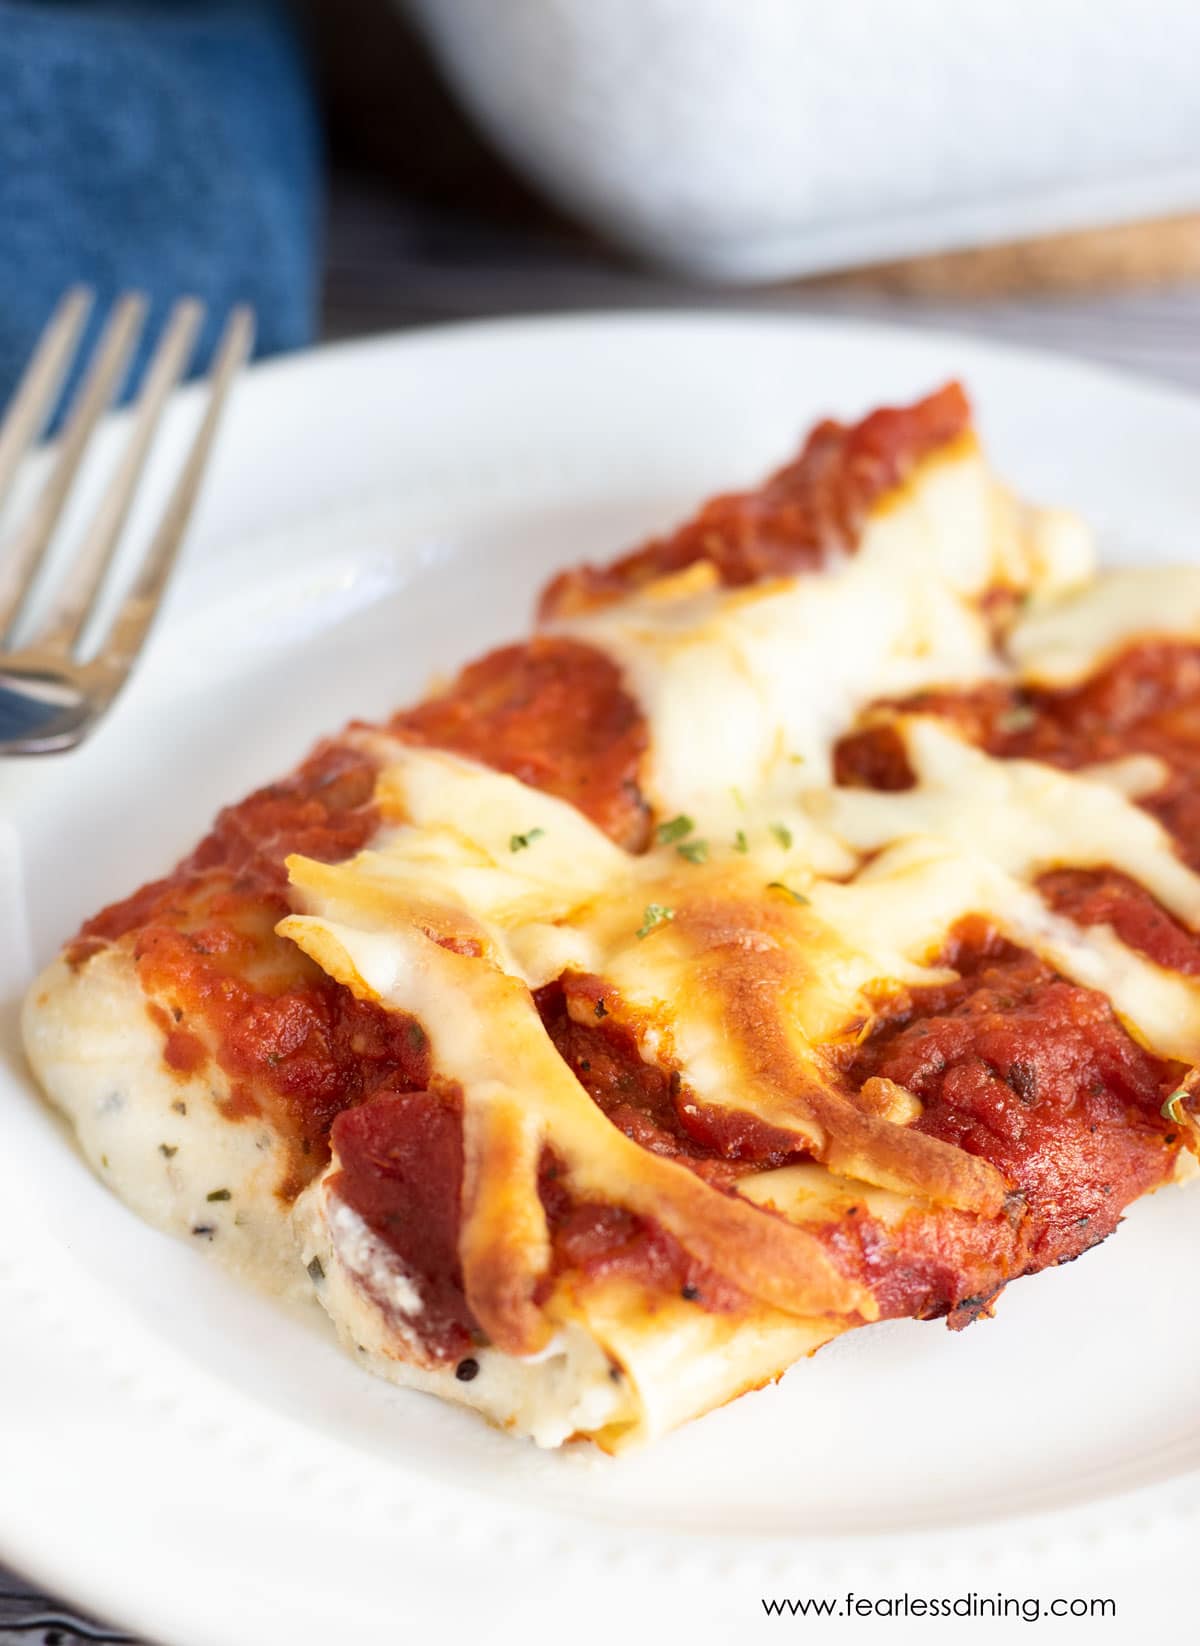 A plate with two cheese stuffed manicotti.